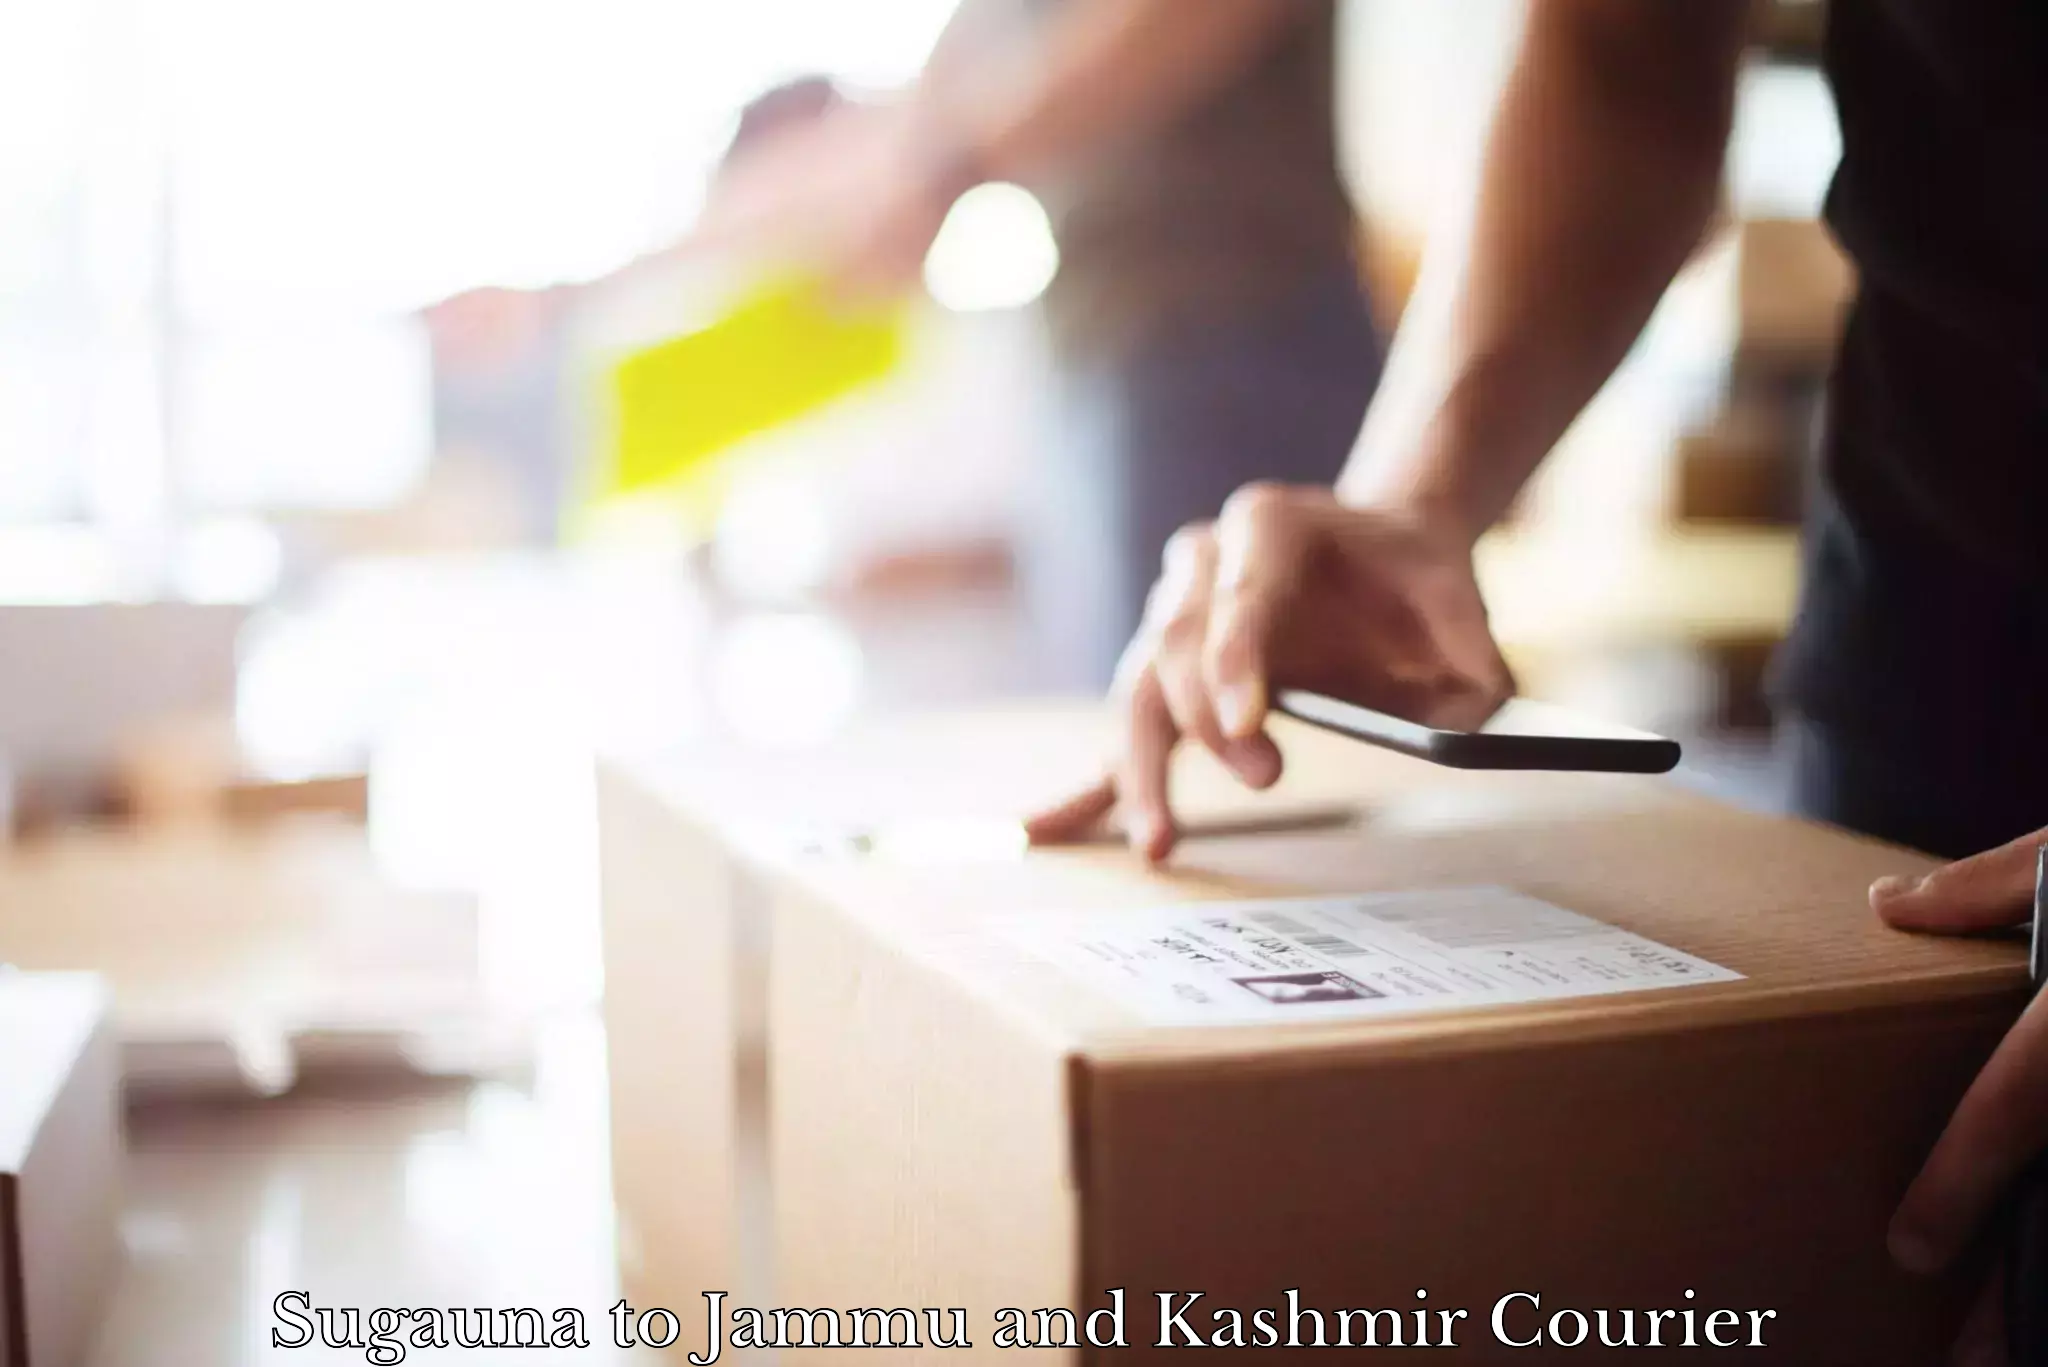 Rapid shipping services in Sugauna to Anantnag